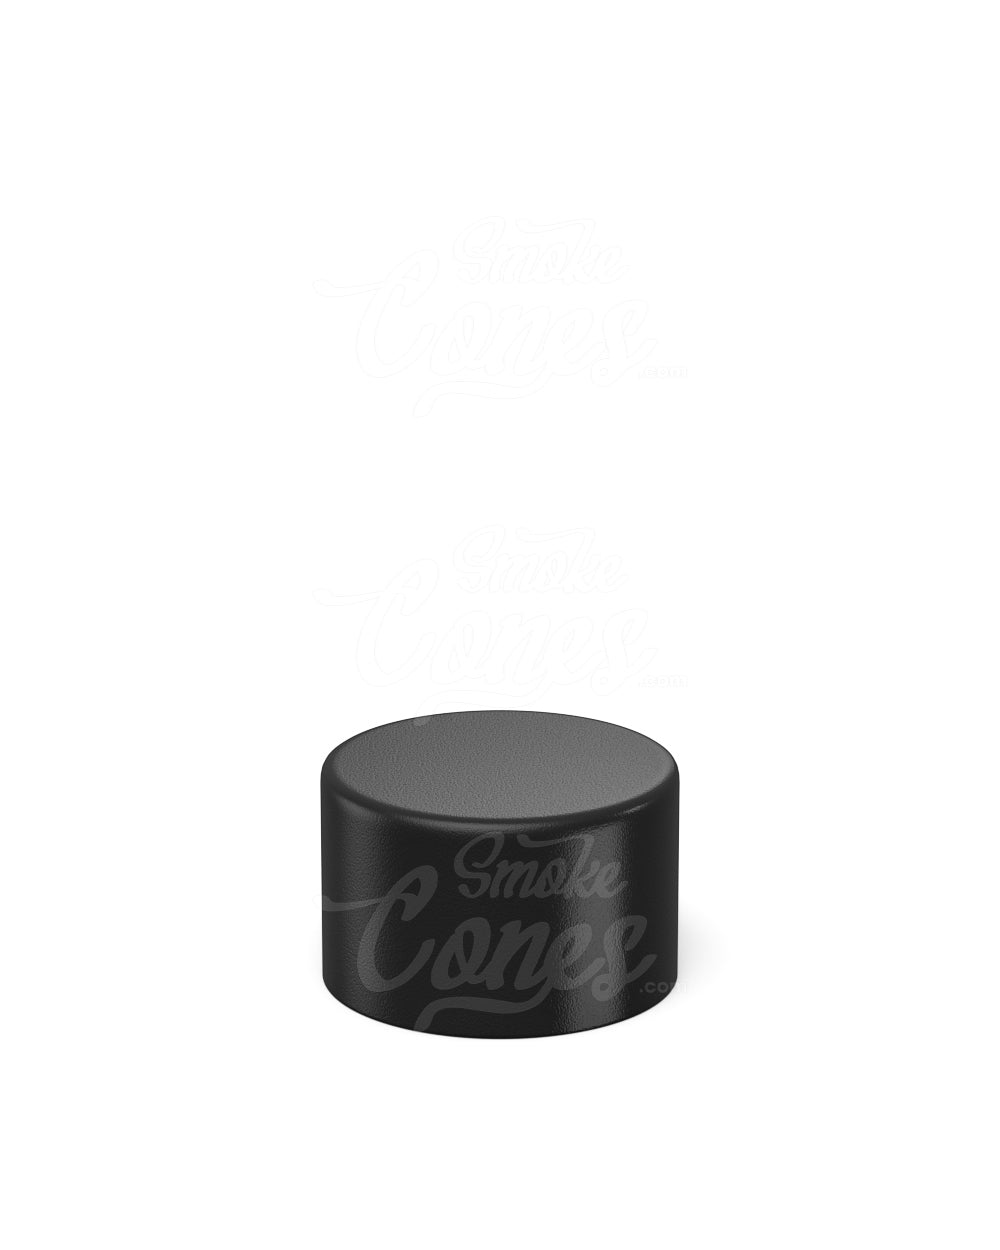 28mm Smooth Push and Turn Flat Plastic CR Caps For Wide Body Glass Tubes - Matte Black - 200/Box